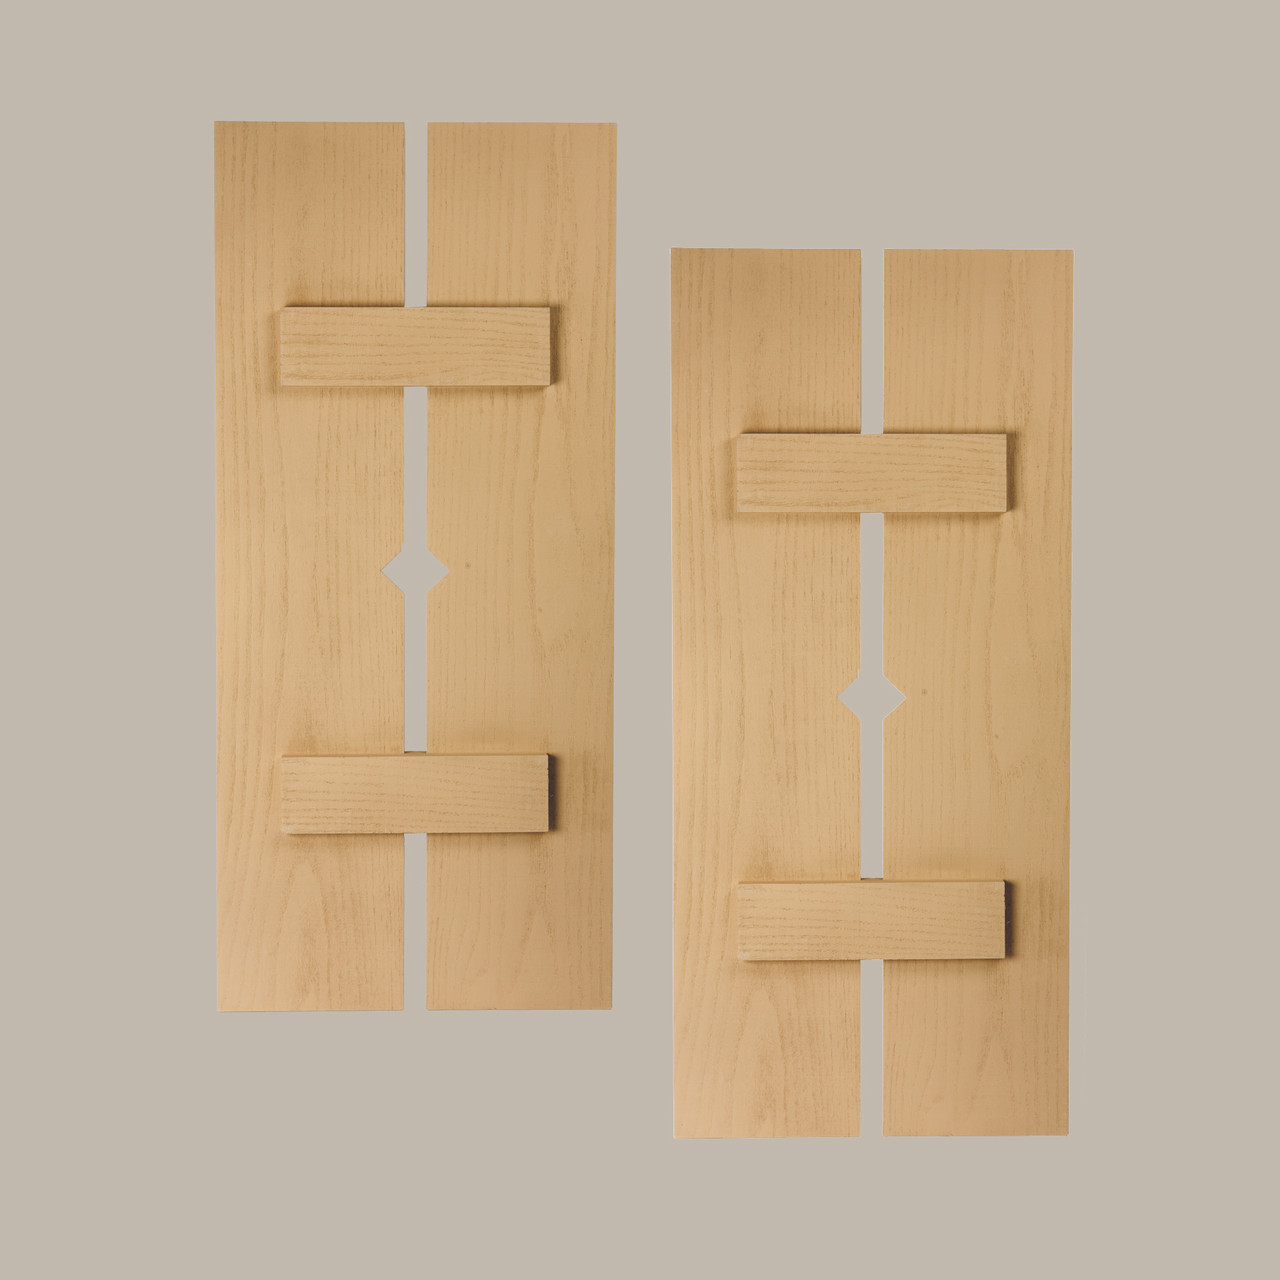 12 inch by 91 inch Plank Shutter with 2-Plank, Diamond